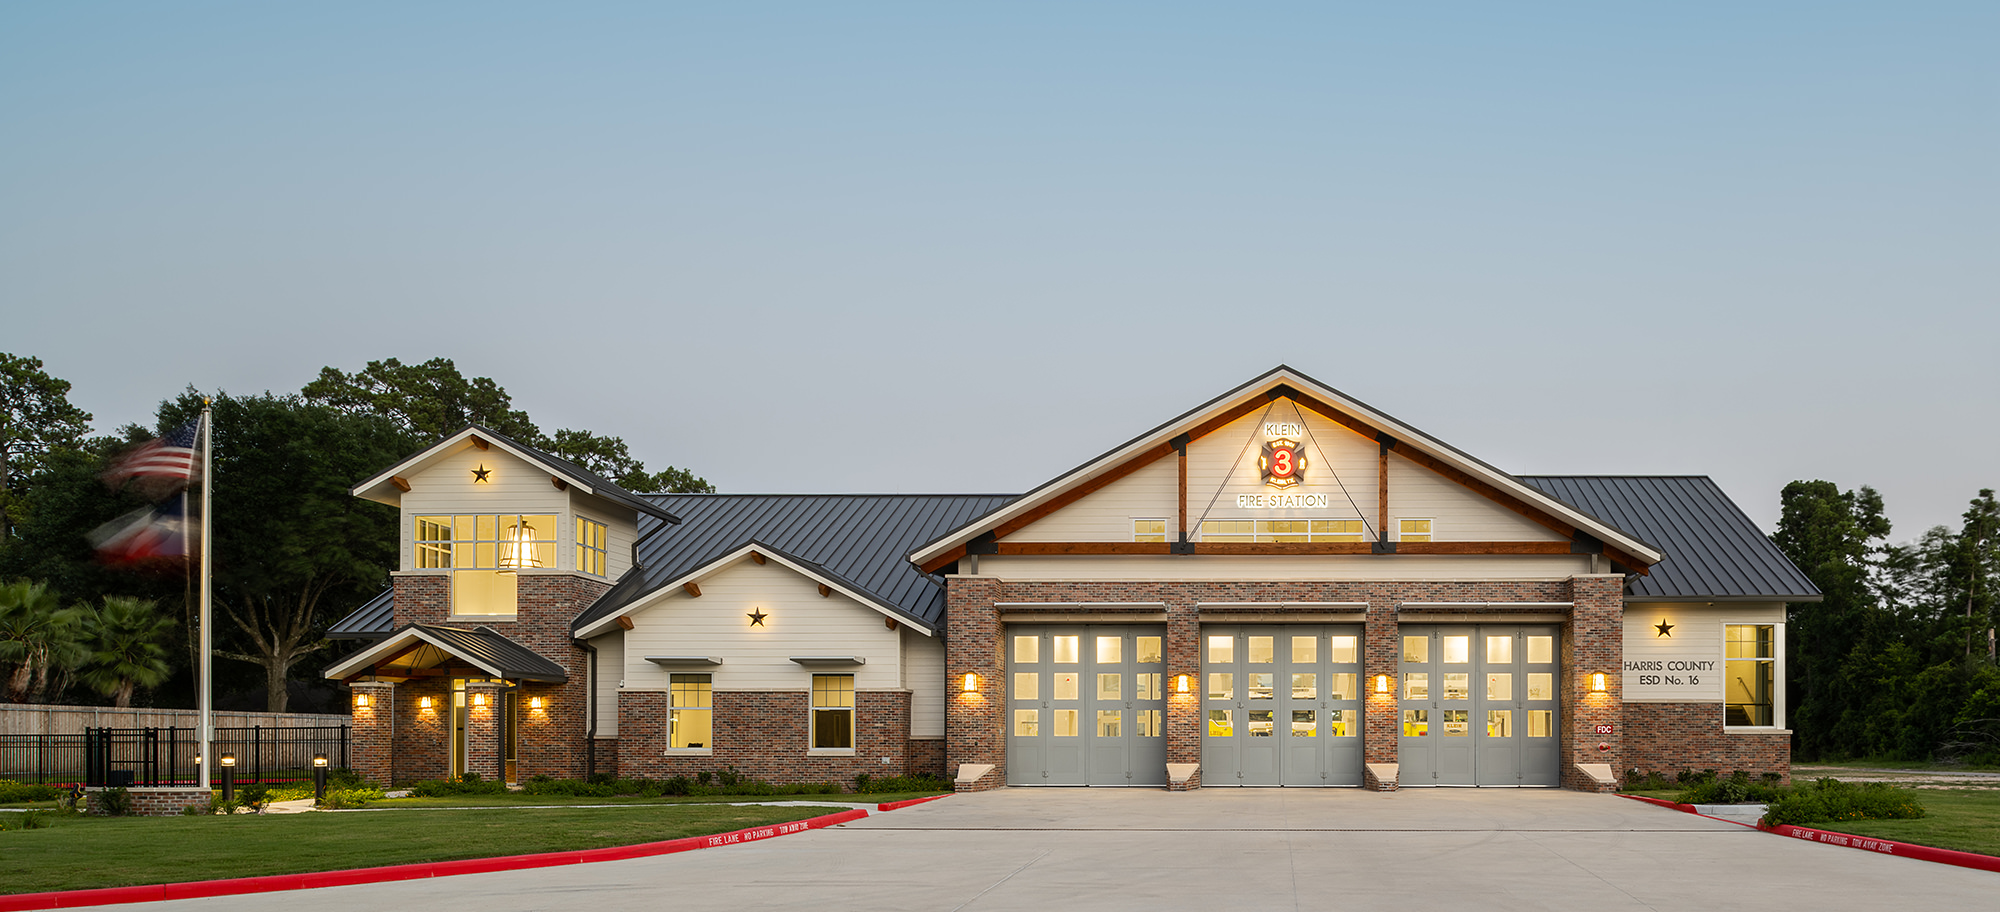 Klein Fire Station No 3. and Fire Training Facility